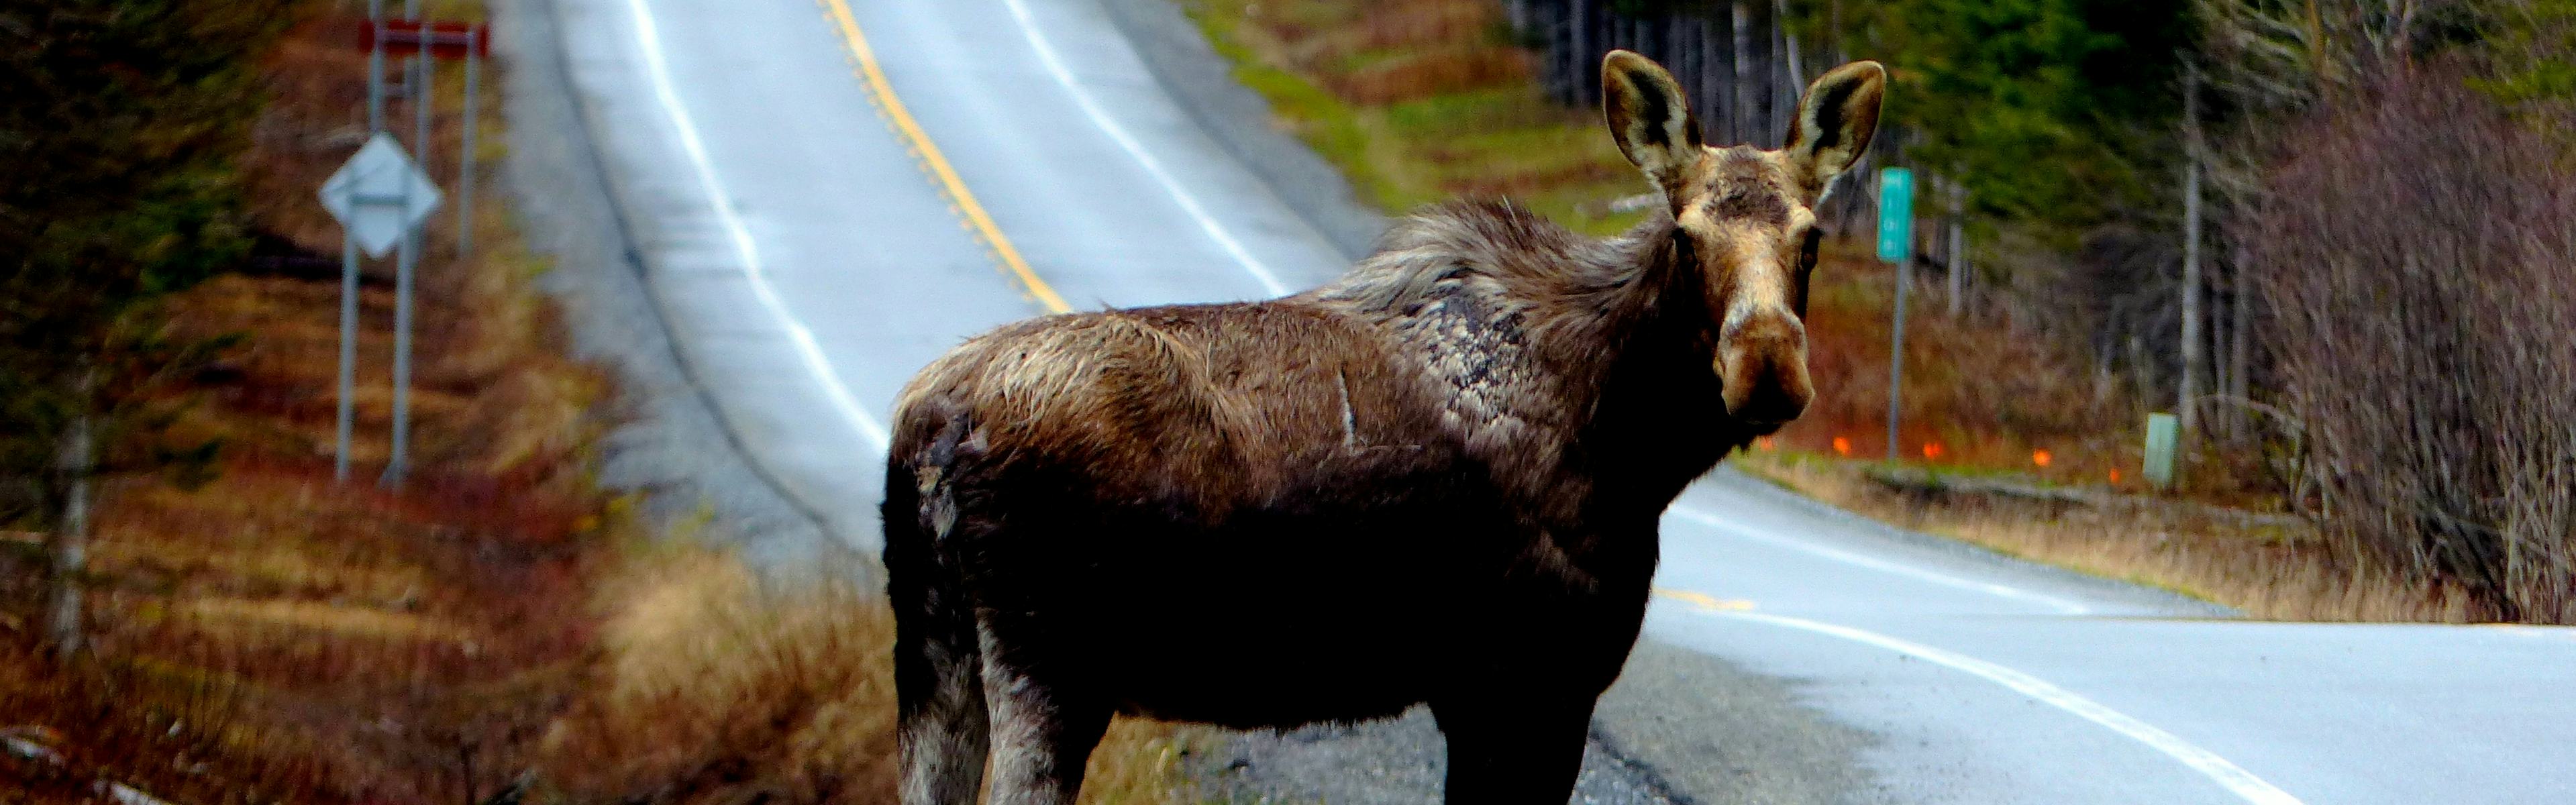 How to Avoid Wildlife Collisions with a moose on a road